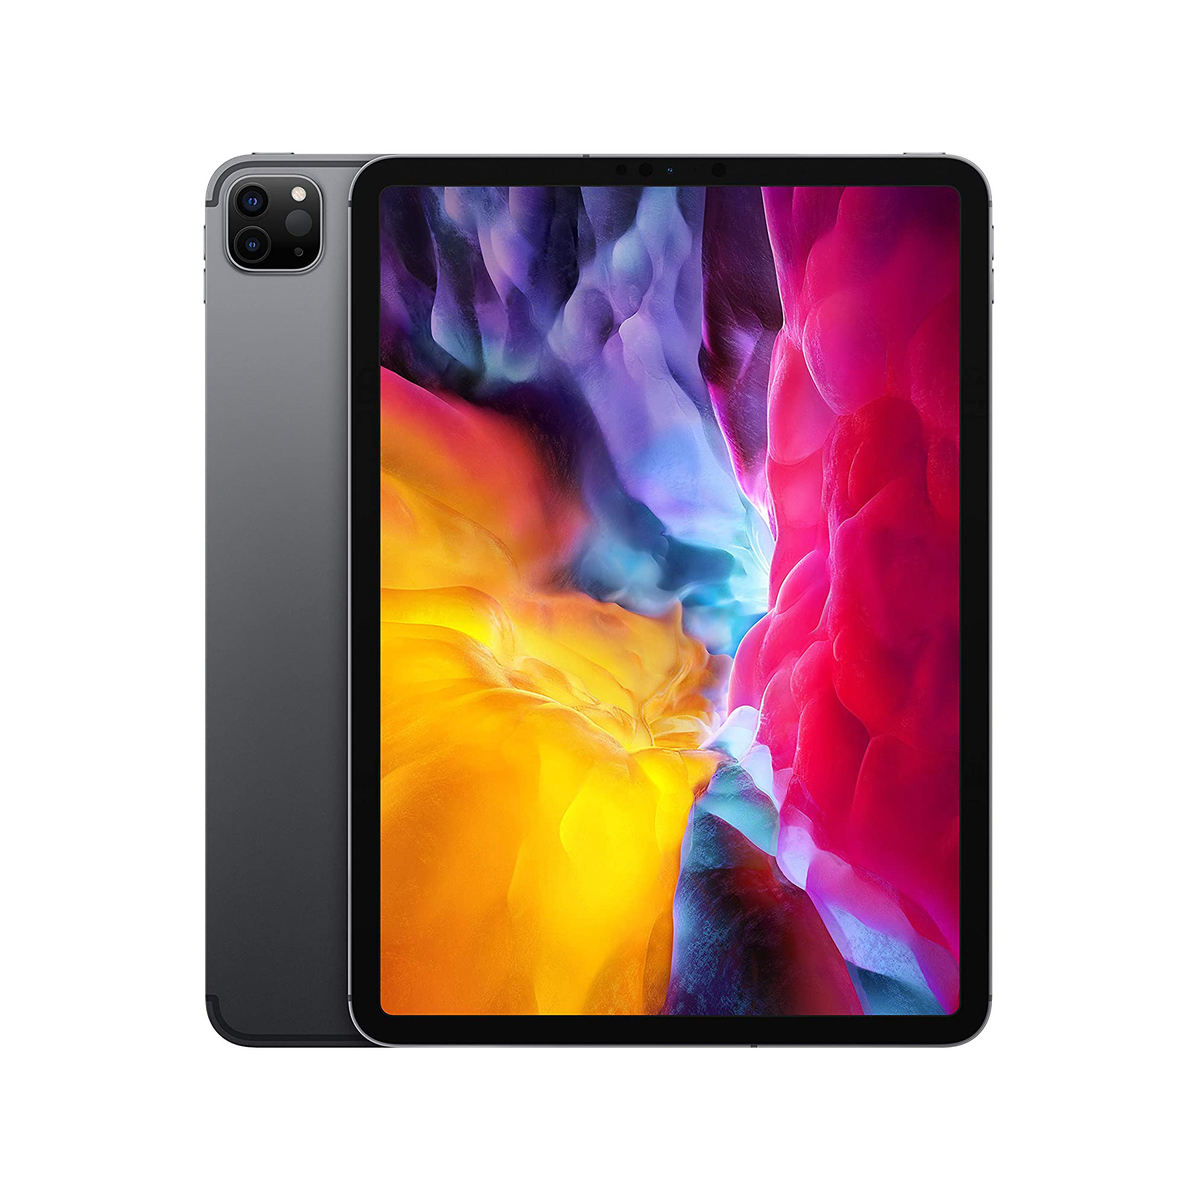 Buy Apple iPad Pro (11-inch, Wi-Fi + Cellular, 512GB) - Space Gray (2nd Generation) Online at Best Price | Tablets | Lulu Kuwait in Kuwait